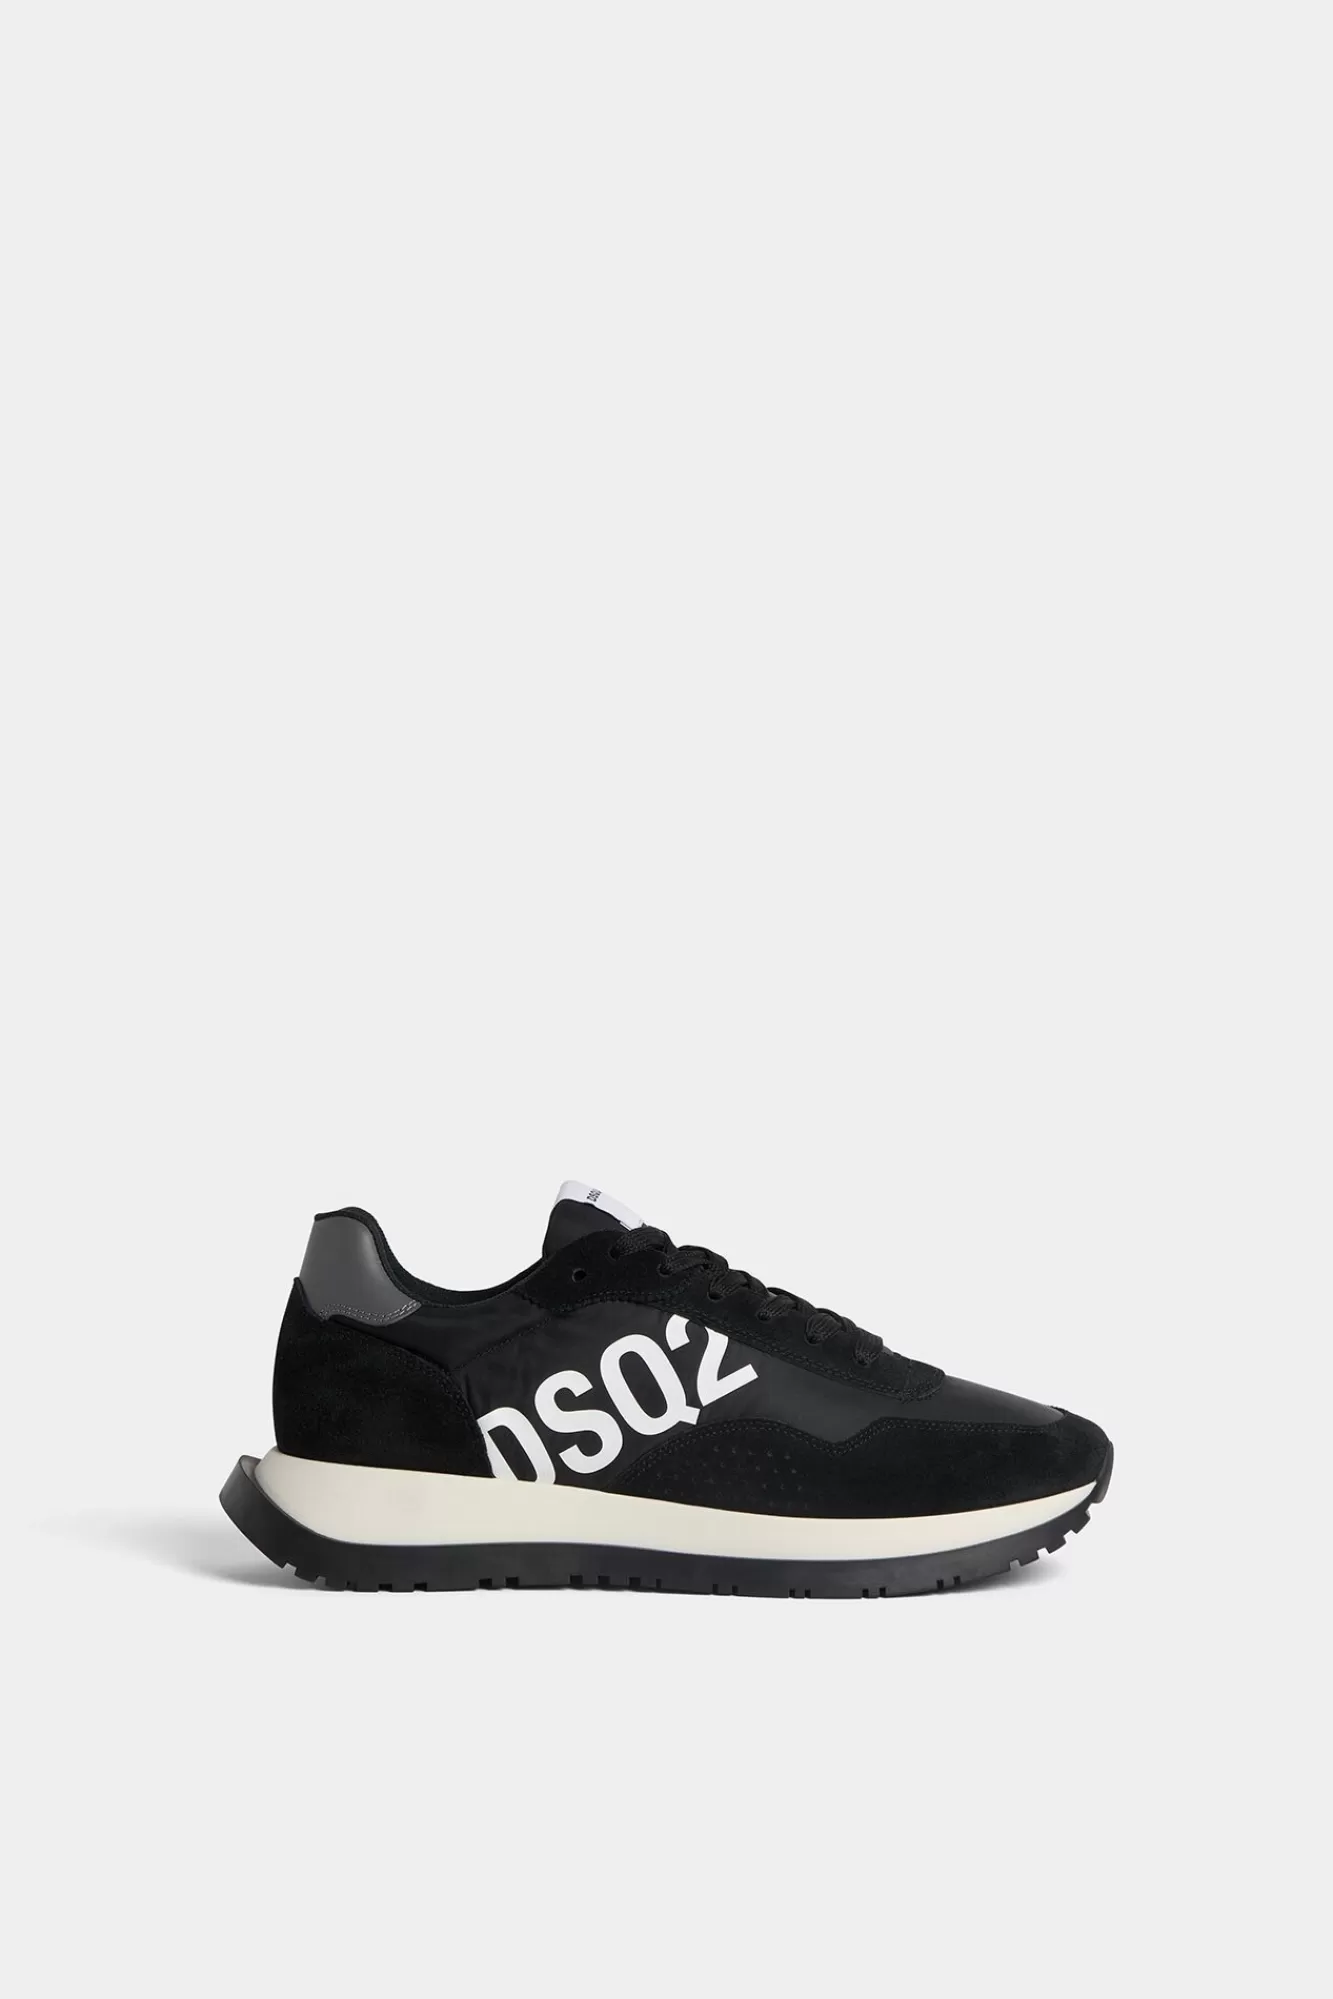 Running Sneakers<Dsquared2 Clearance